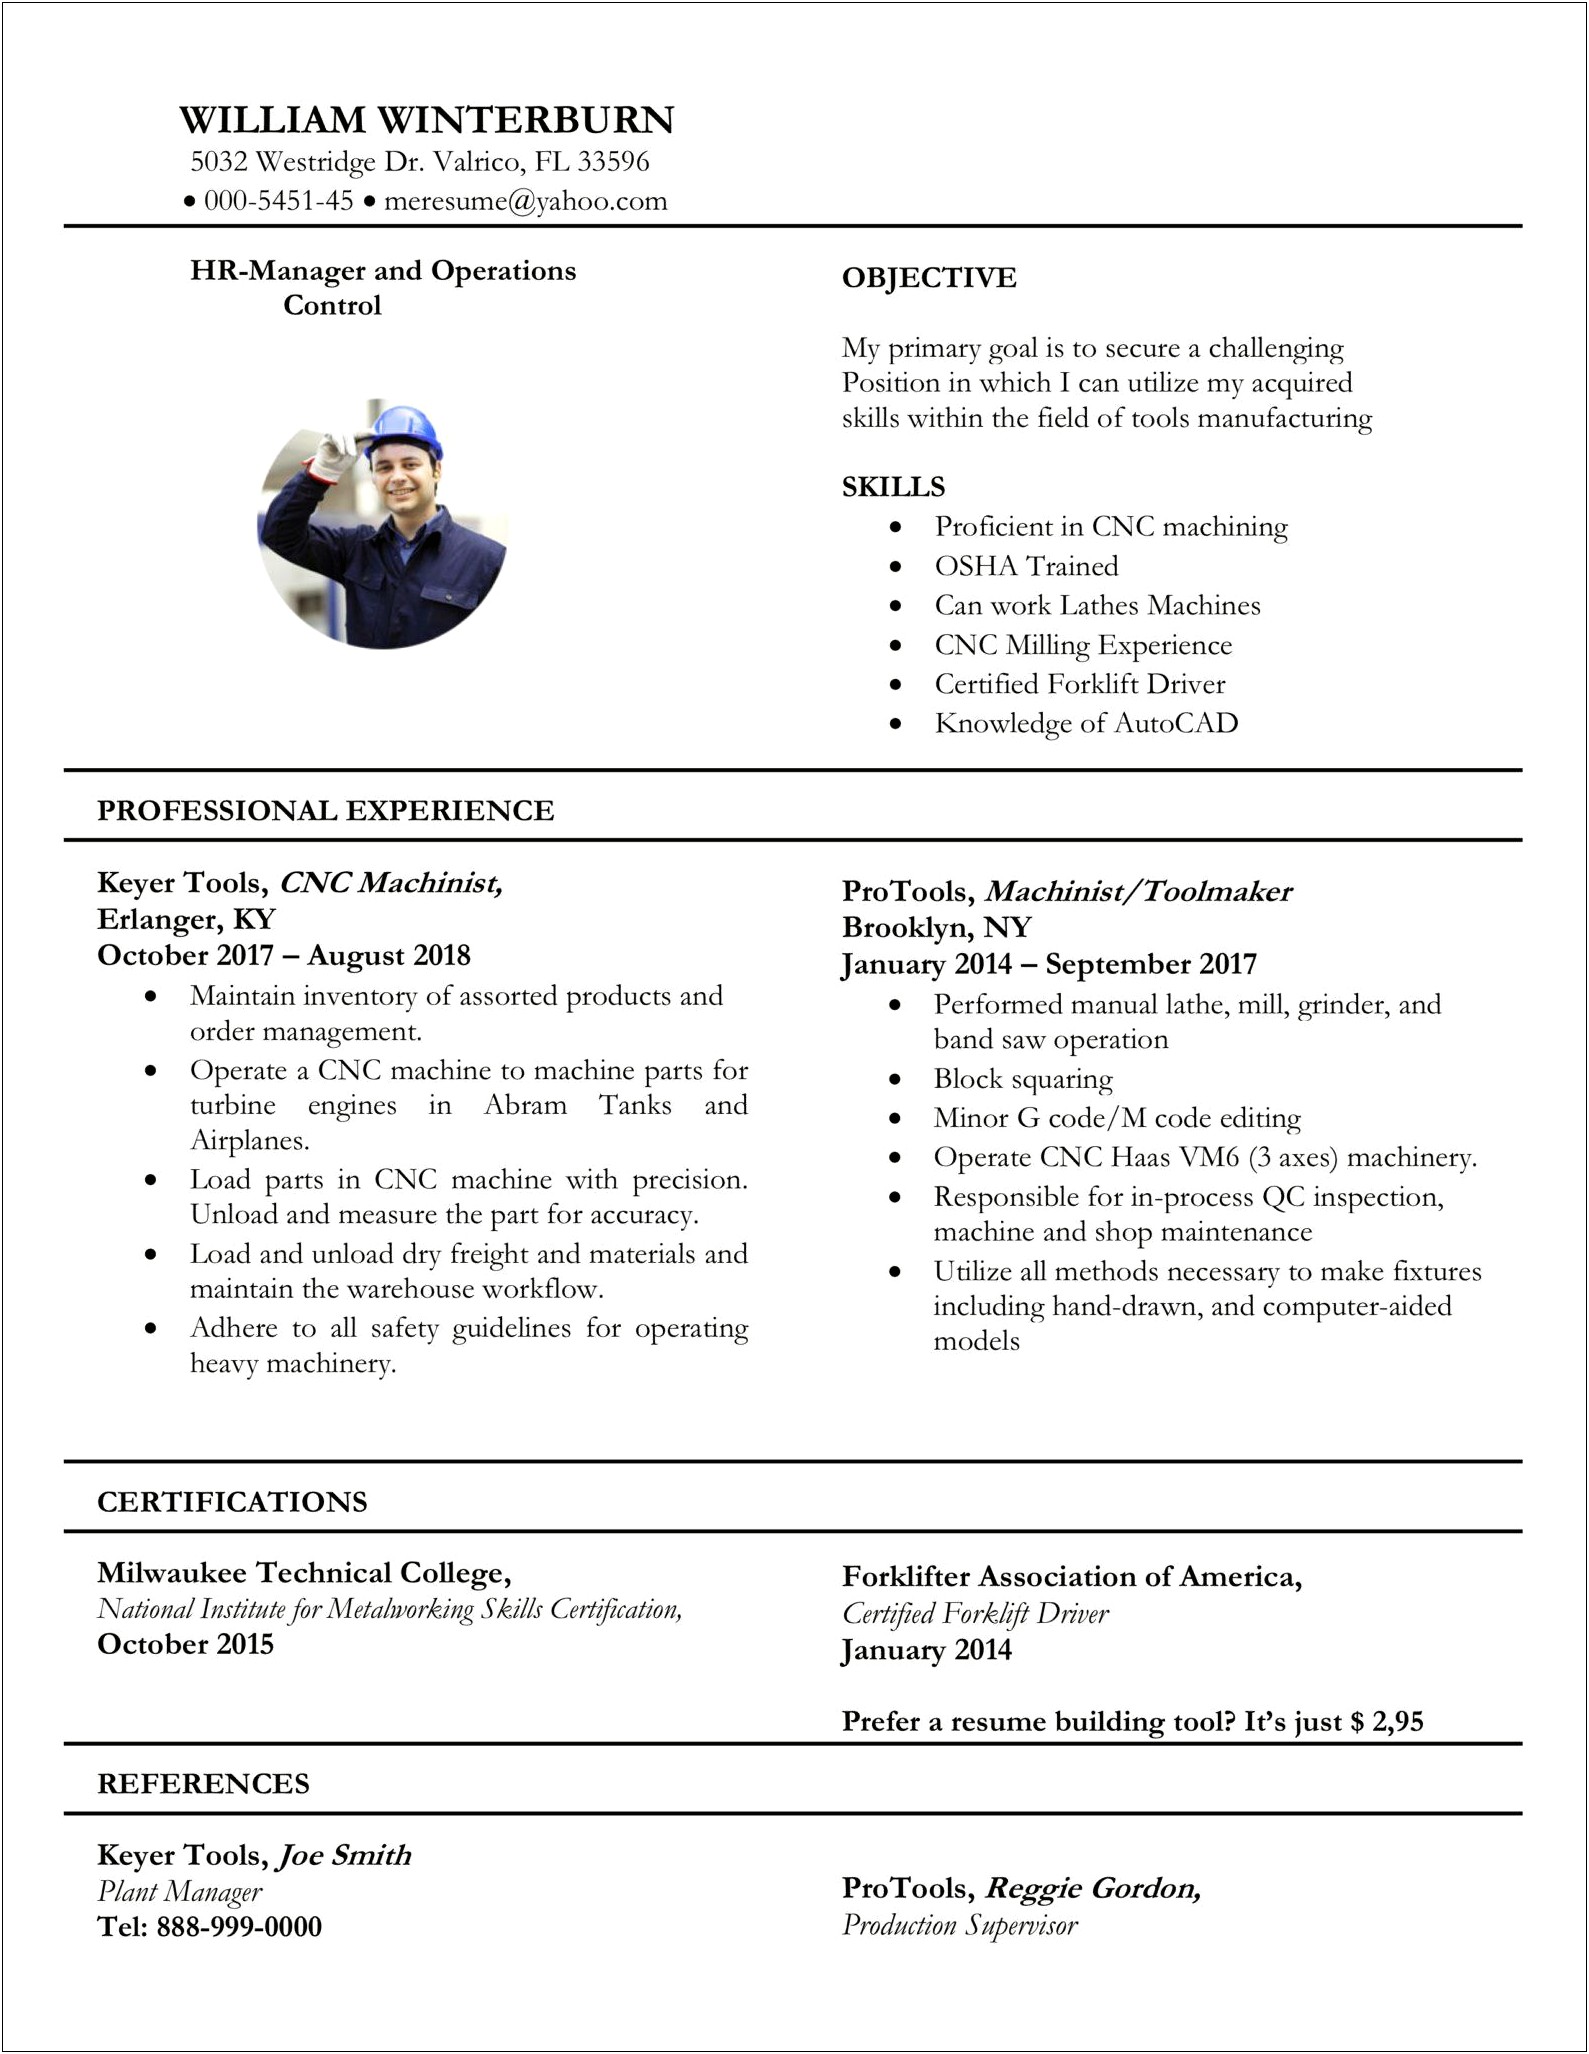 Resume Format 2019 Template Free Download